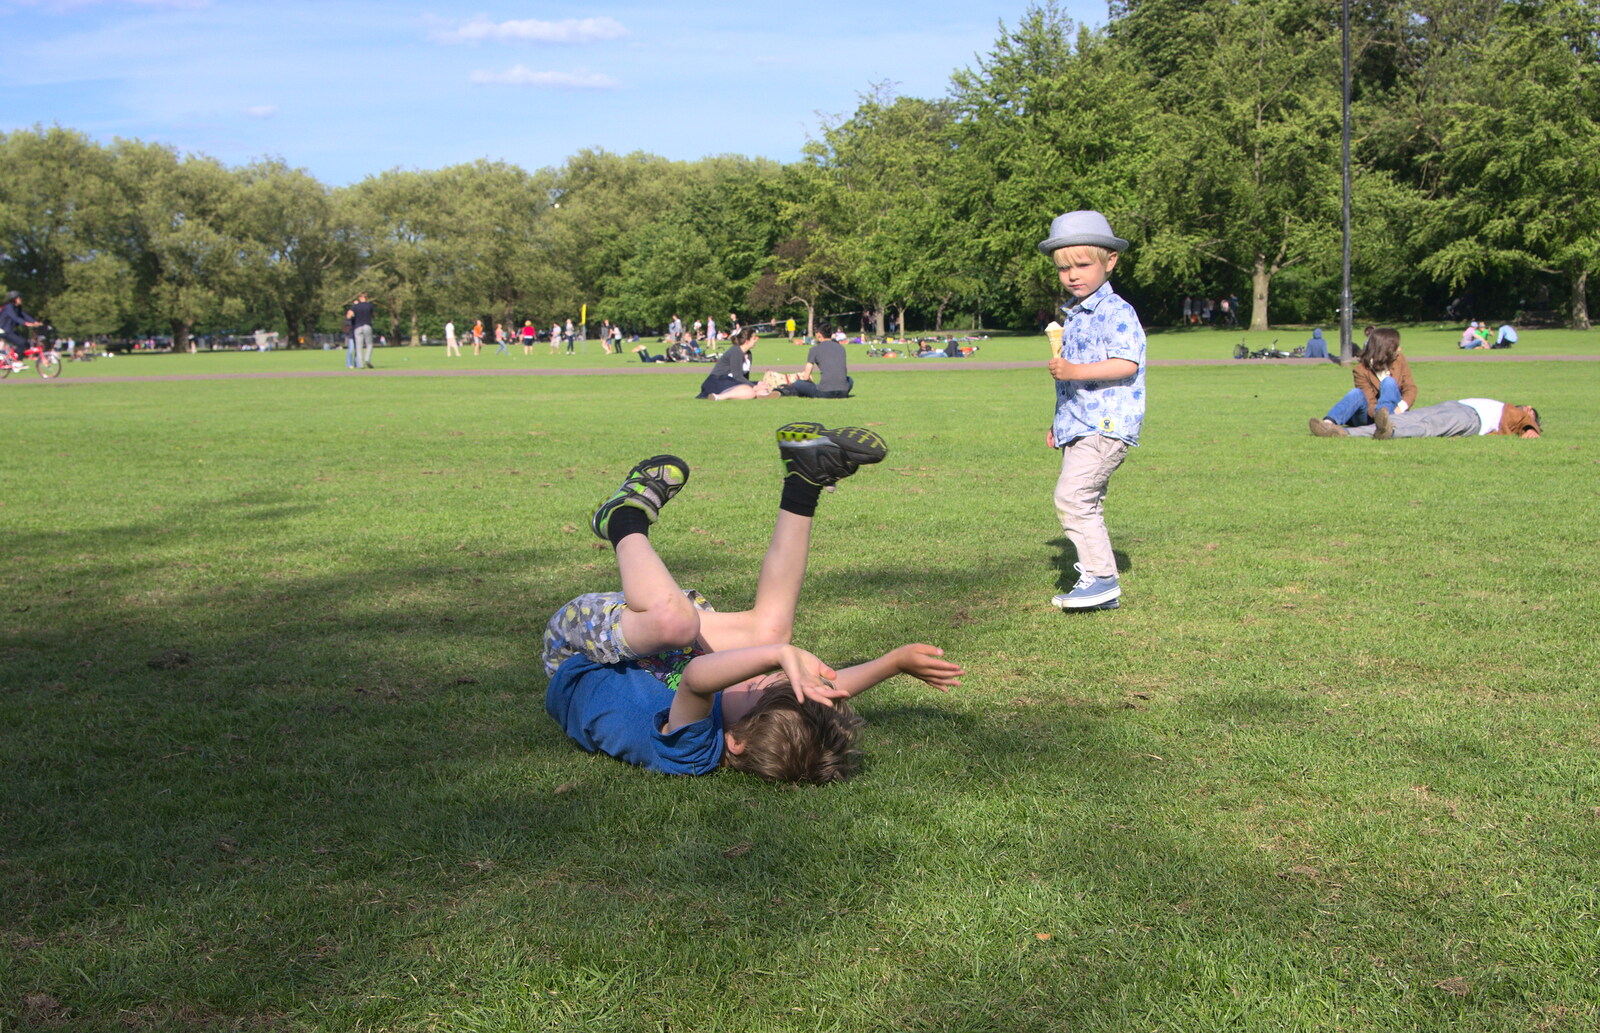 Fred rolls around from Punting With Grandad, Cambridge, Cambridgeshire - 6th June 2015